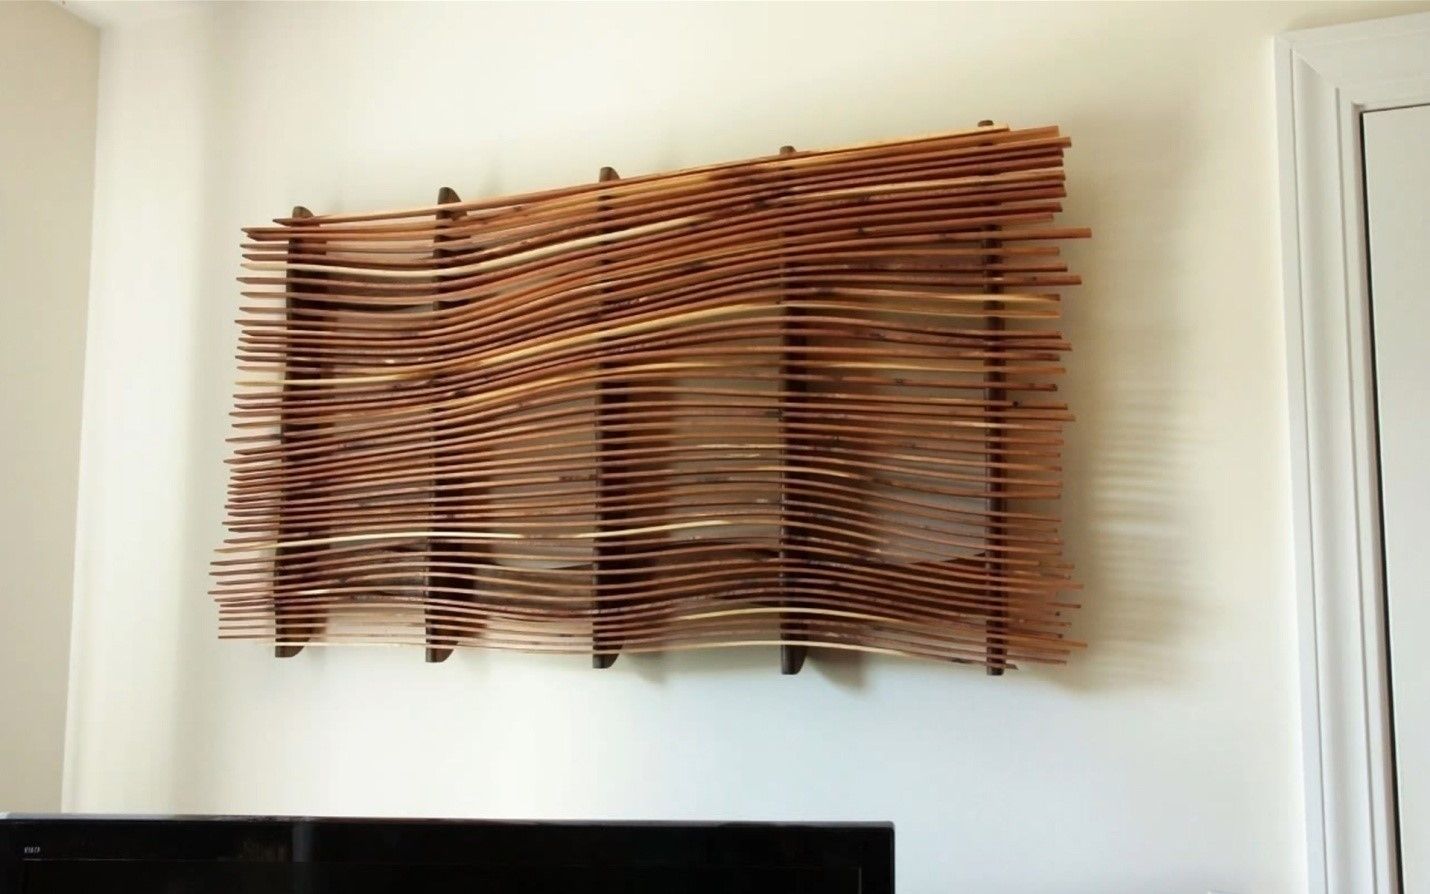 How To Make Wall Art From Scrap Wood | Diy Project – Cut The Wood In Diy Wood Wall Art (Photo 6 of 20)